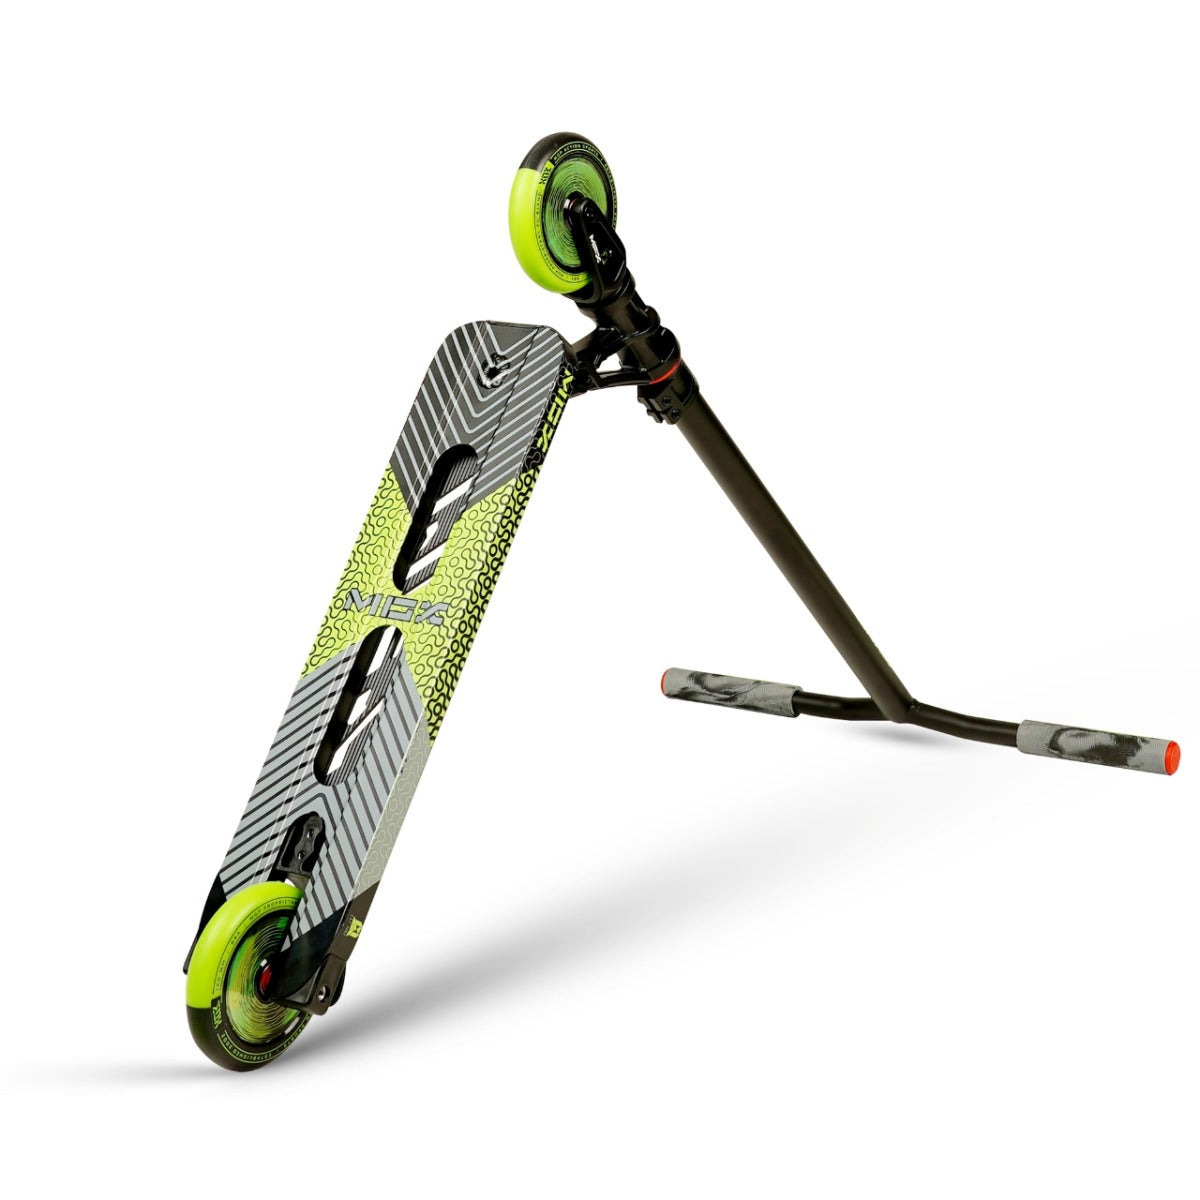 Madd Gear MGP MGX P2 Pro Complete Stunt Scooter - Vex - Graphic